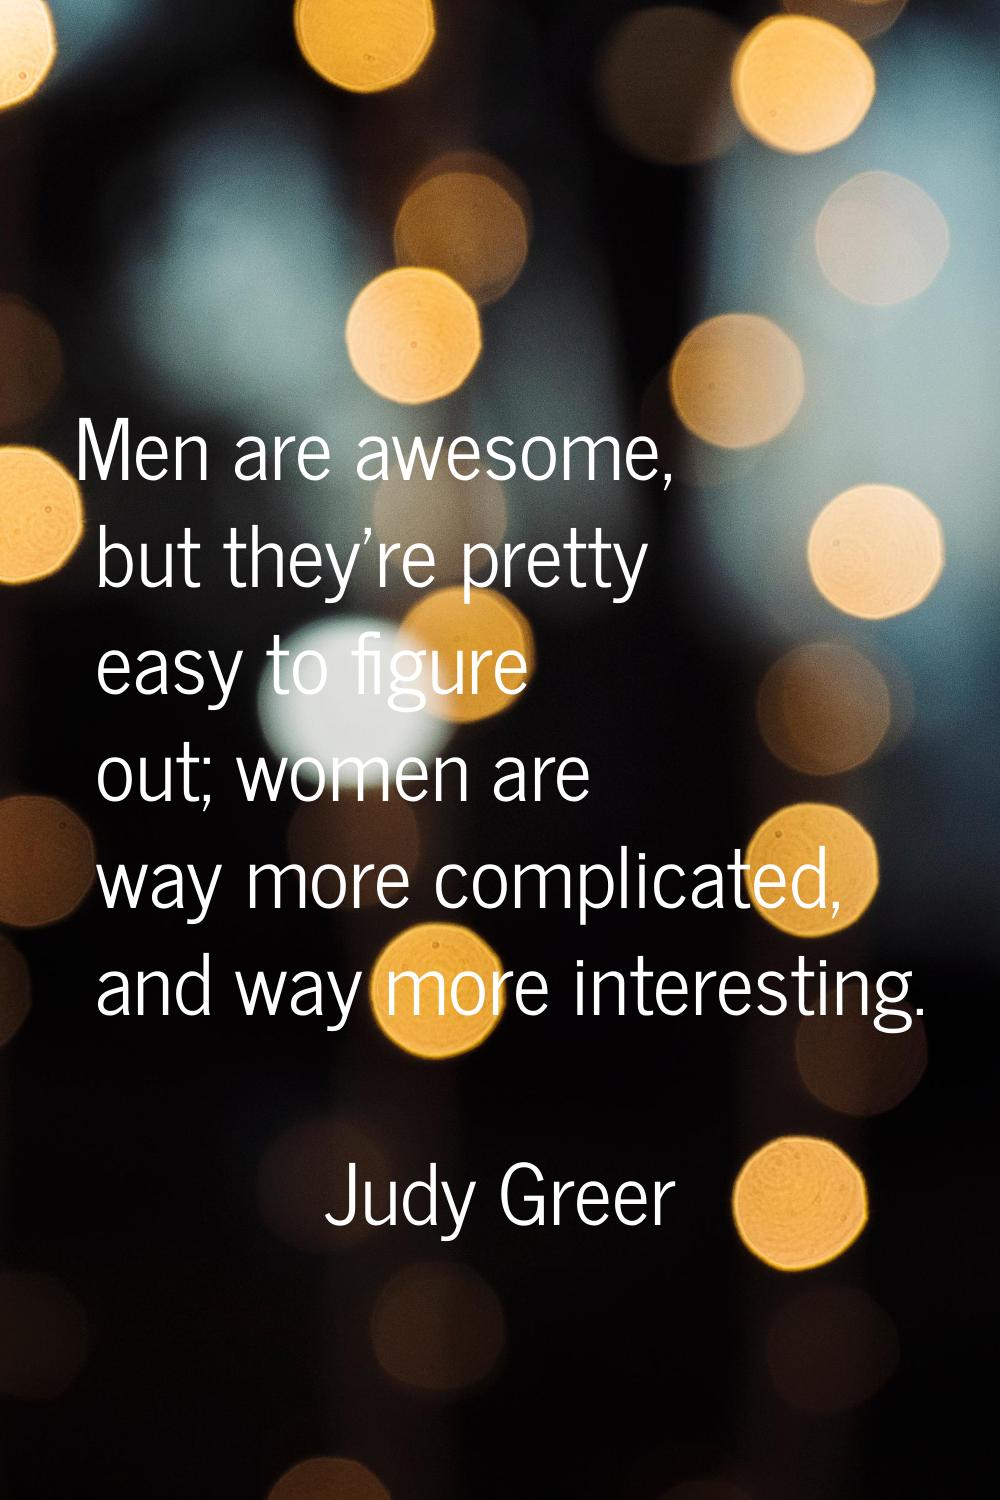 Men are awesome, but they're pretty easy to figure out; women are way more complicated, and way mor